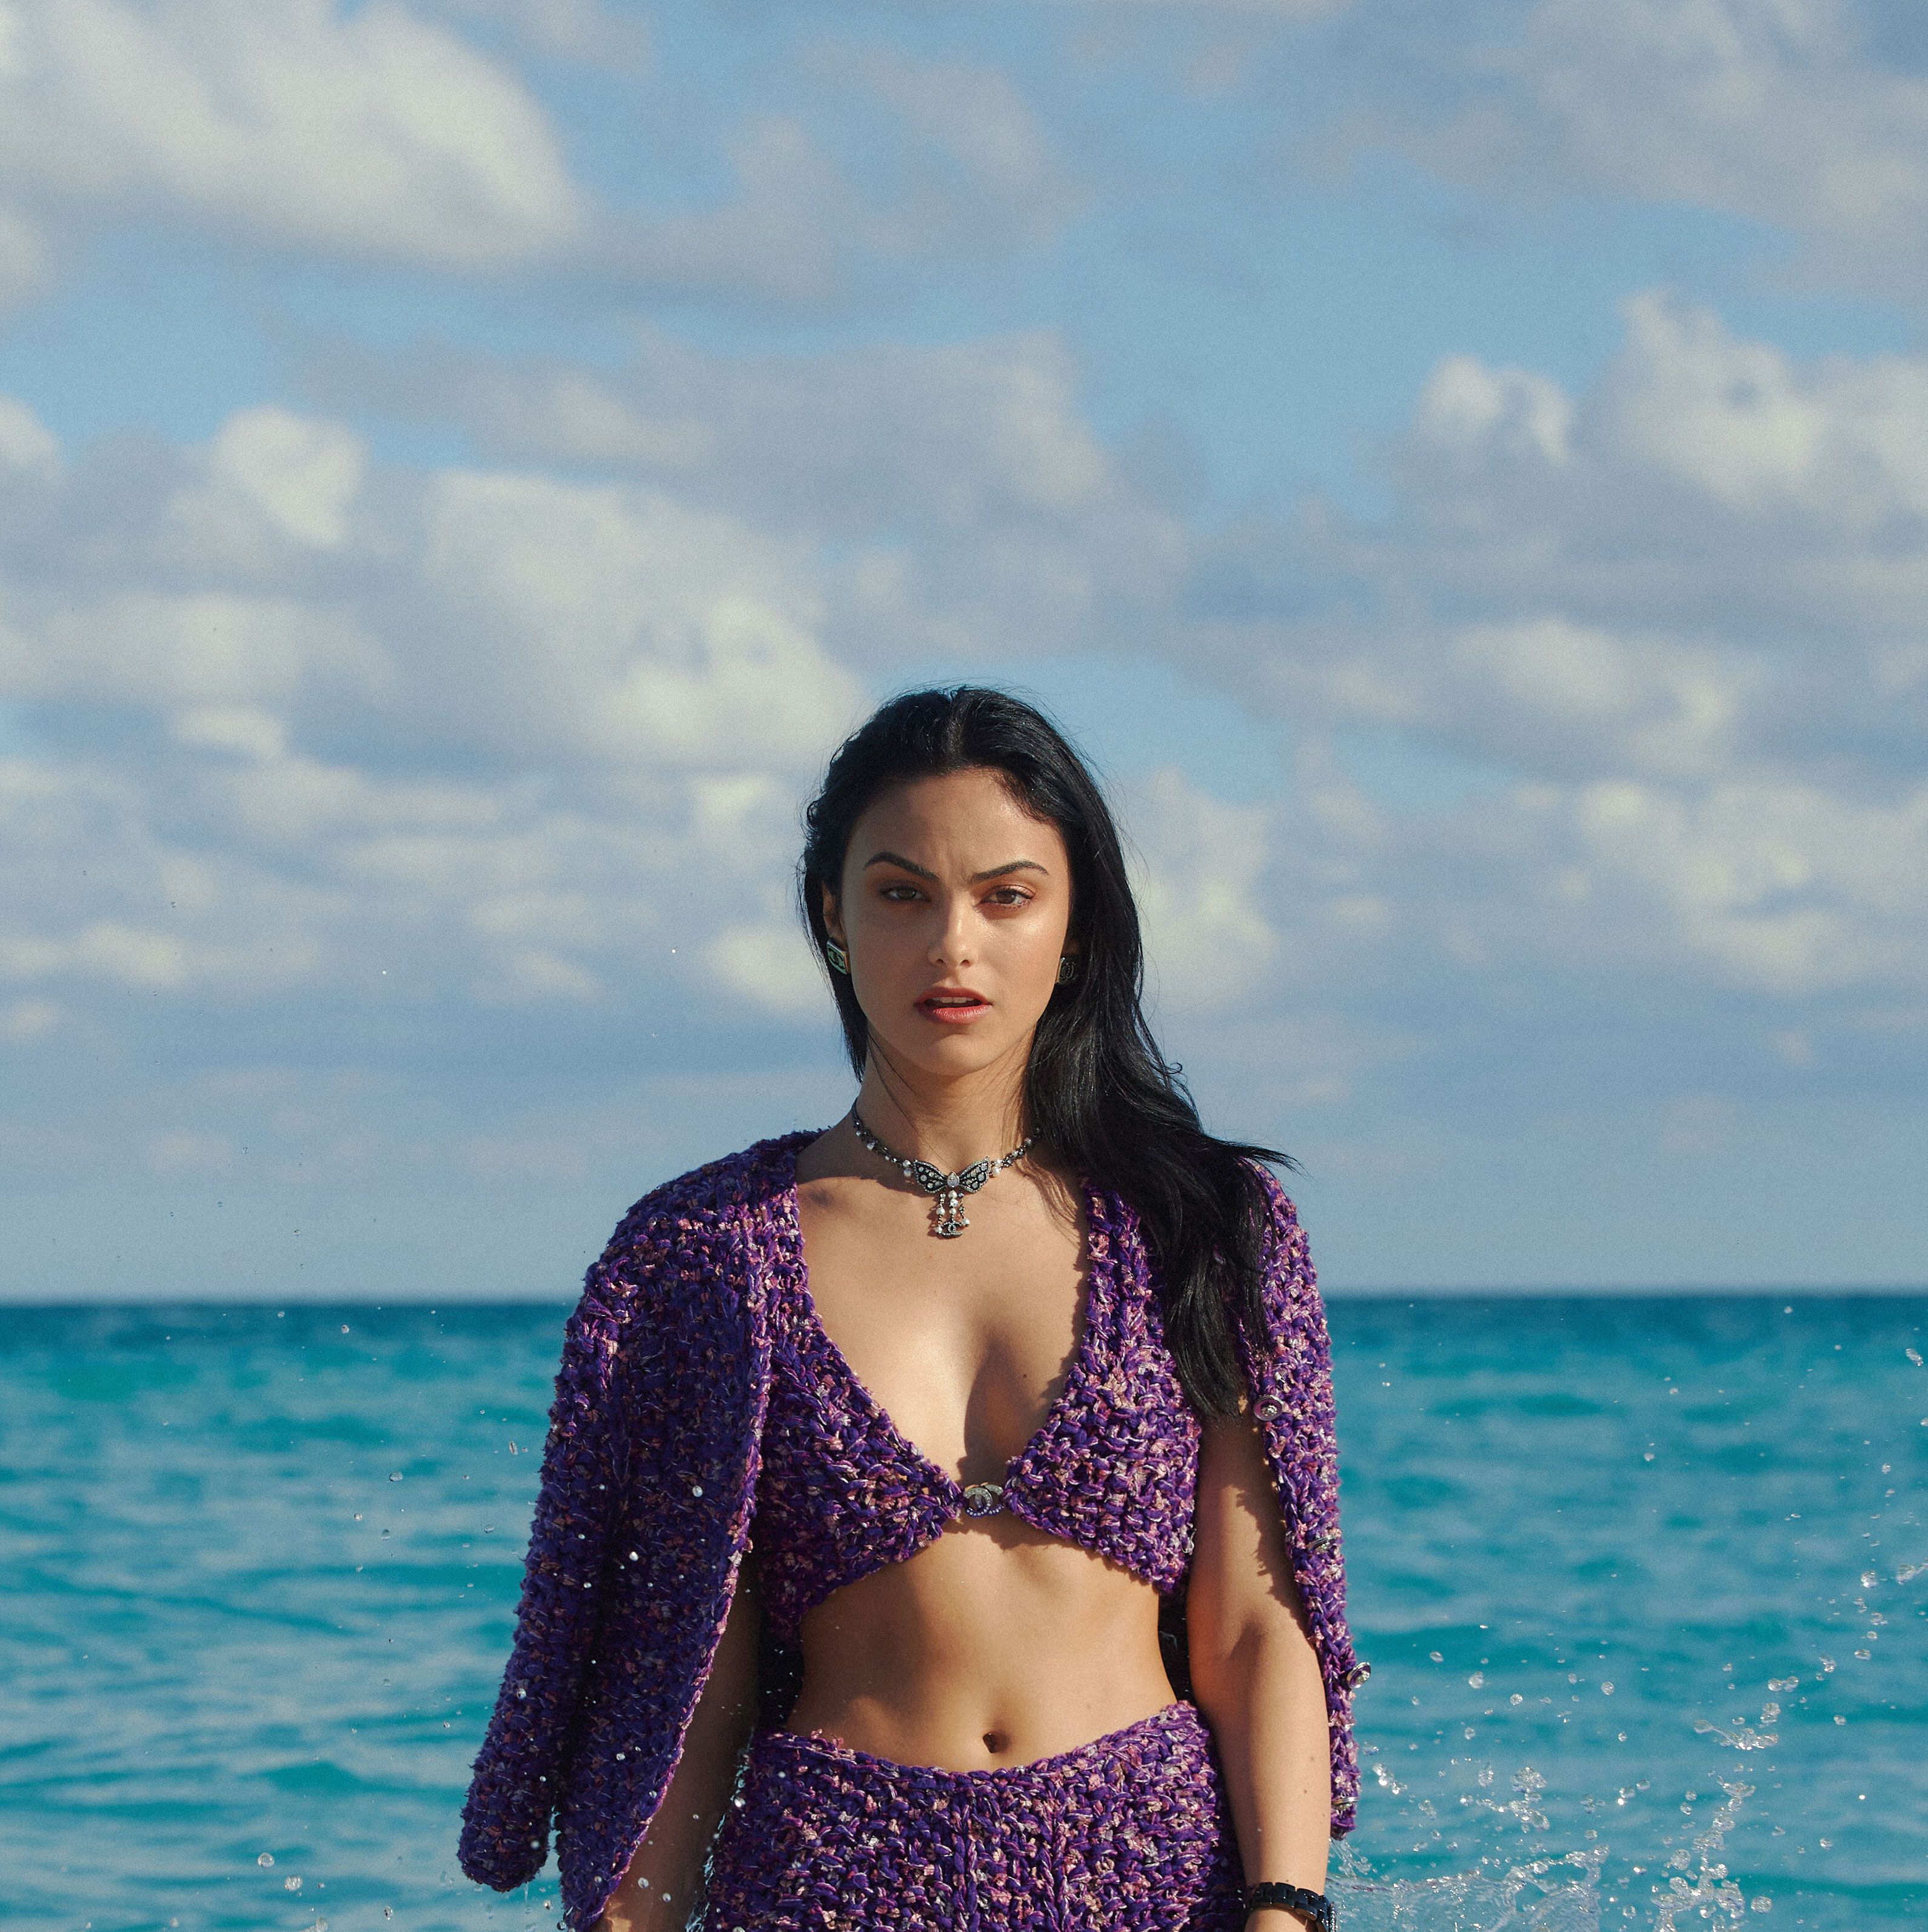 Is the ocean bigger than Camila Mendes? Certainly—but also, in some respects, no. In real life, Mendes is 5’2” while the Atlantic Ocean takes up nearly 41 million miles. Watch the <I>Riverdale</I> star wade through waves in Miami—even while wearing some gasp-worthy beachwear from Chanel—and it’s easy to lose her between the blue-green swells that smash the horizon. She’s just one girl, after all, and the ocean is eternal.

<br><br>That’s in the physical realm, anyway. What happens when you view Mendes through your phone is a little different. For starters, the 27-year-old is captivating onscreen, with a wide open face she knows how to use. (After four years of training at NYU’s prestigious Tisch School of the Arts, it seems her eyebrows alone have mastered the Stanislavski method of “react first, think later.”) Put a camera on her in the Atlantic, as photographer Tyler Joe did at the shoreline of the Faena Hotel, and suddenly you think, What ocean?

<br><br>Then there’s the data. In the vast corner of the internet known as TikTok, #CamilaMendes content has been viewed roughly 2 billion times. The #AtlanticOcean? About 175 million. We could twist this fact into a parable about environmentalism and Hollywood, or a lament about the attention span of the American teen. Or we could simply accept that in some realms of reality, Mendes is essentially a force of nature.